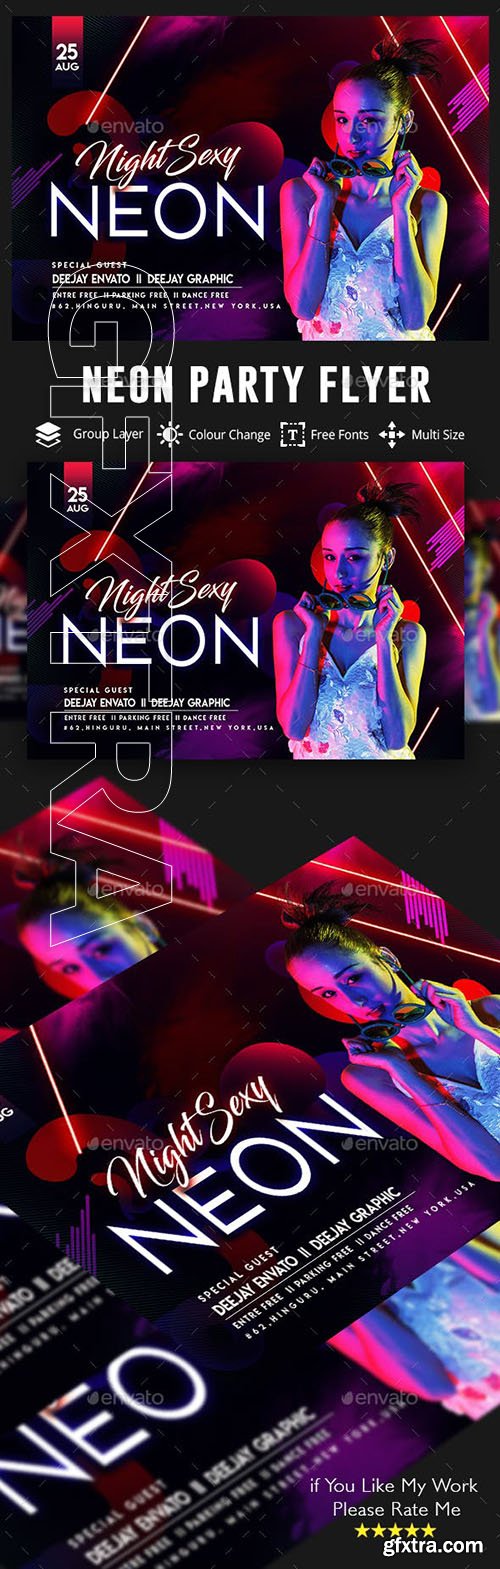 GraphicRiver - Neon Party Flyer 23072025